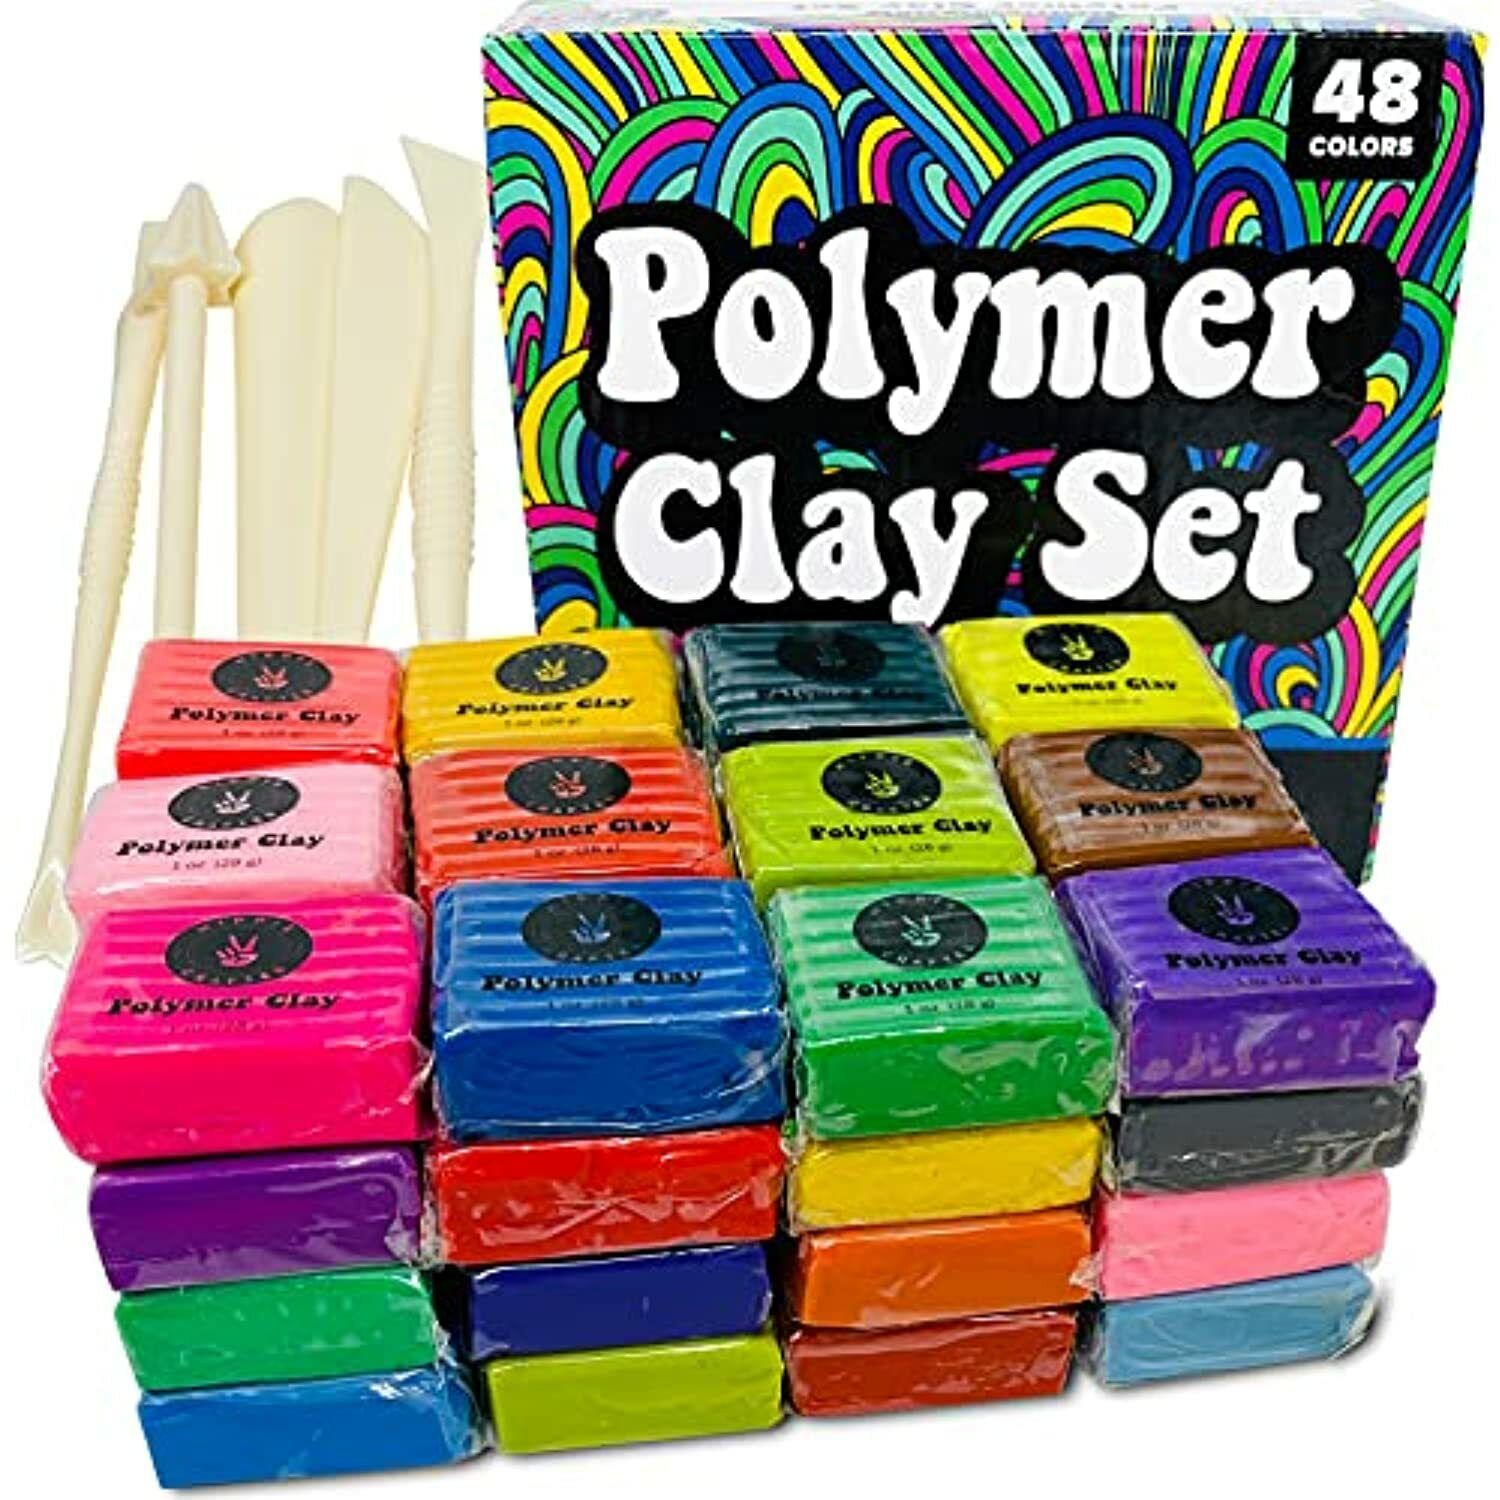 Polymer Clay Set 48 Colors Modeling Clay Sculpting and Oven Bake Kit Baking and